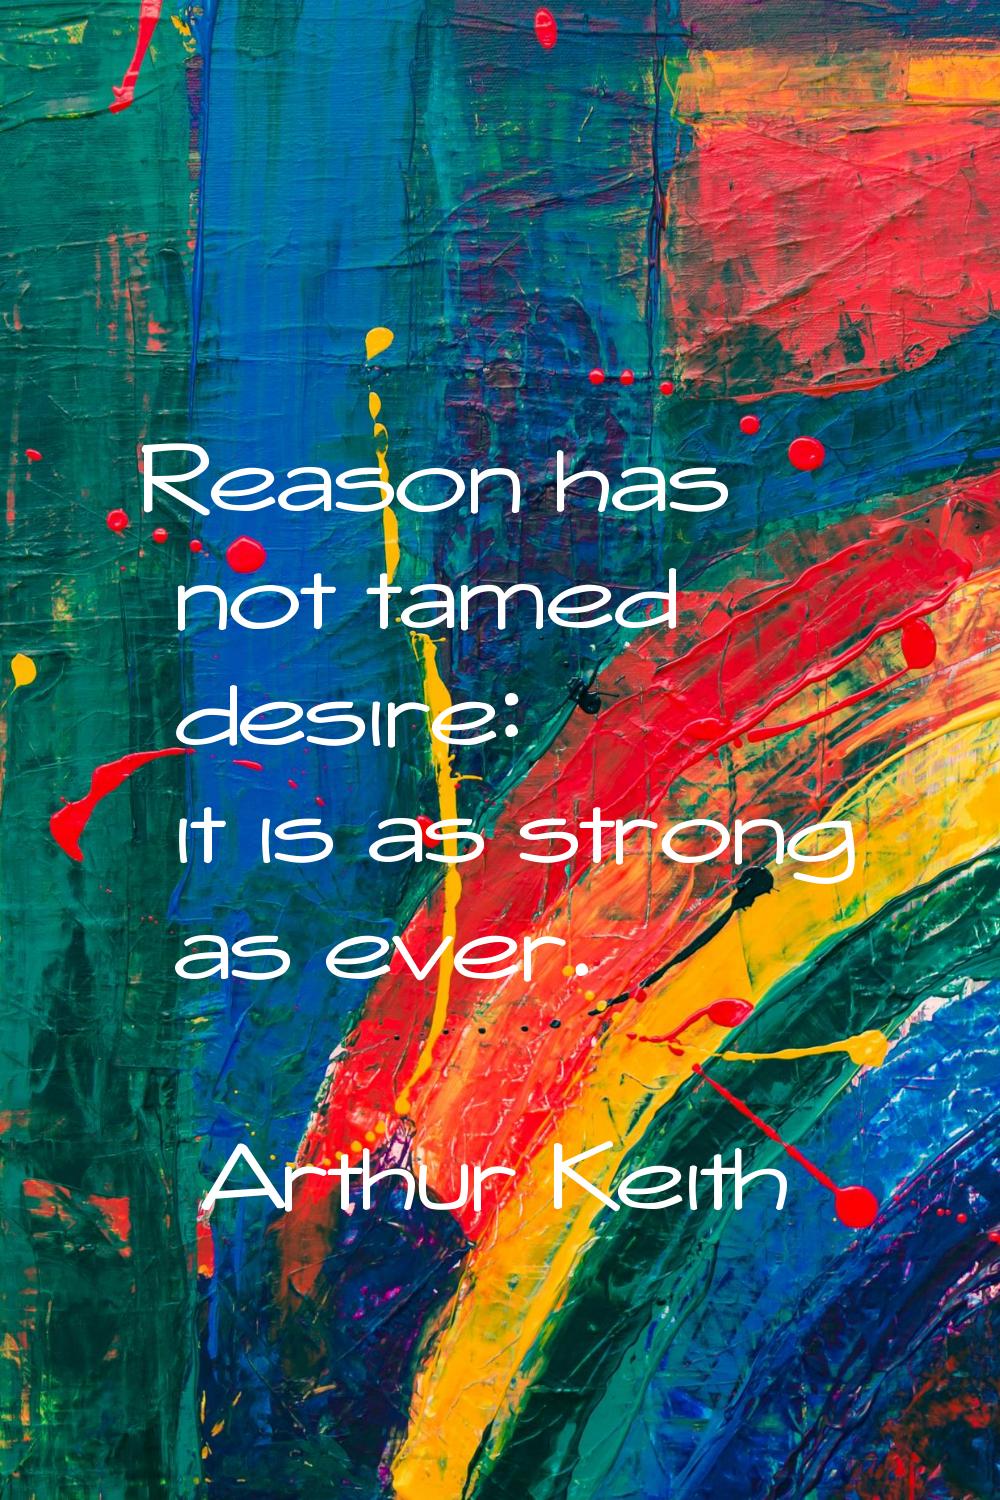 Reason has not tamed desire: it is as strong as ever.